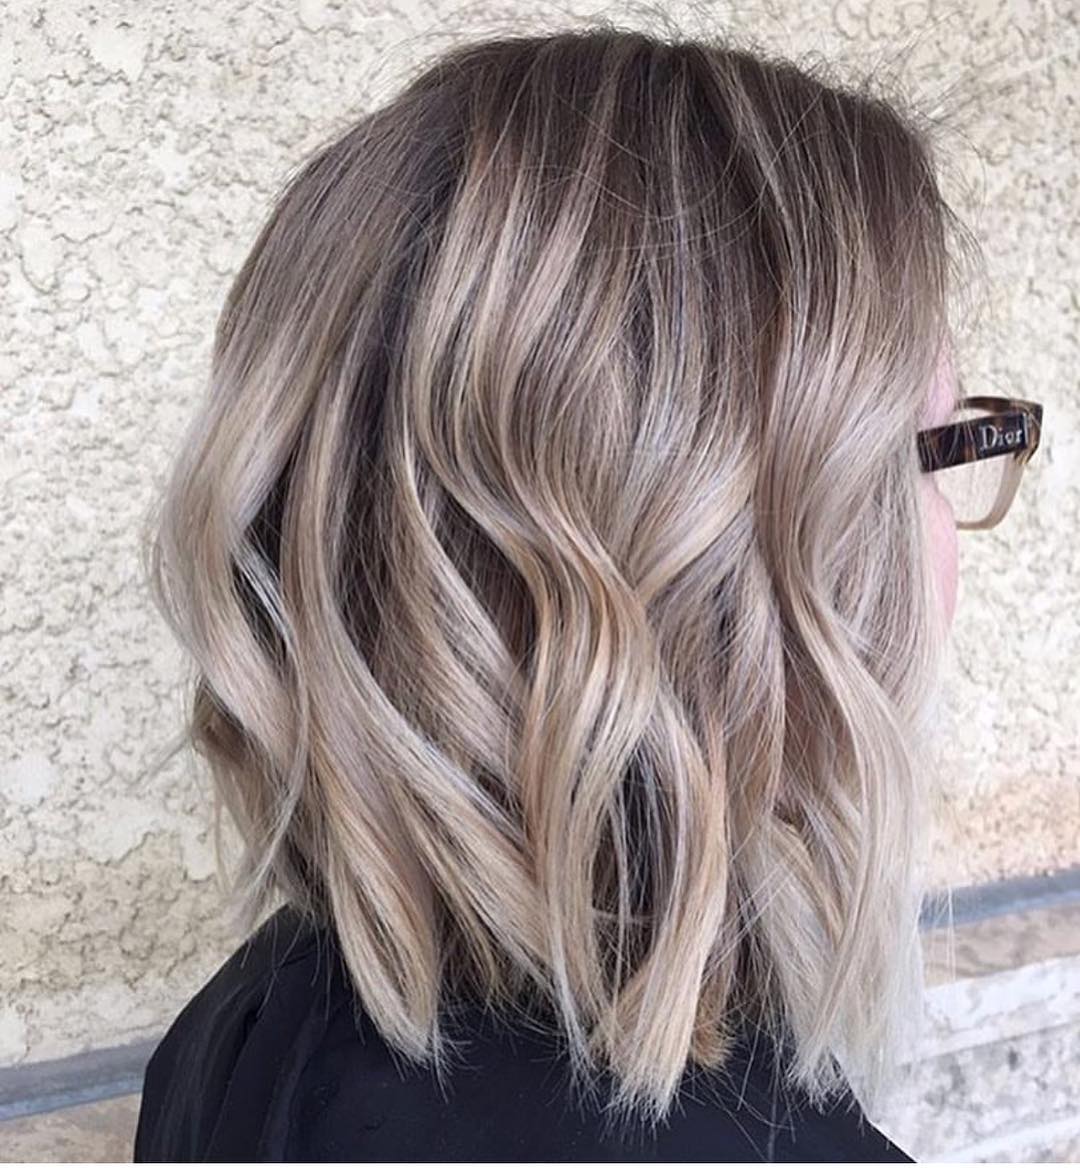 Pretty Balayage Ombre Hair Styles For Shoulder Length Hair